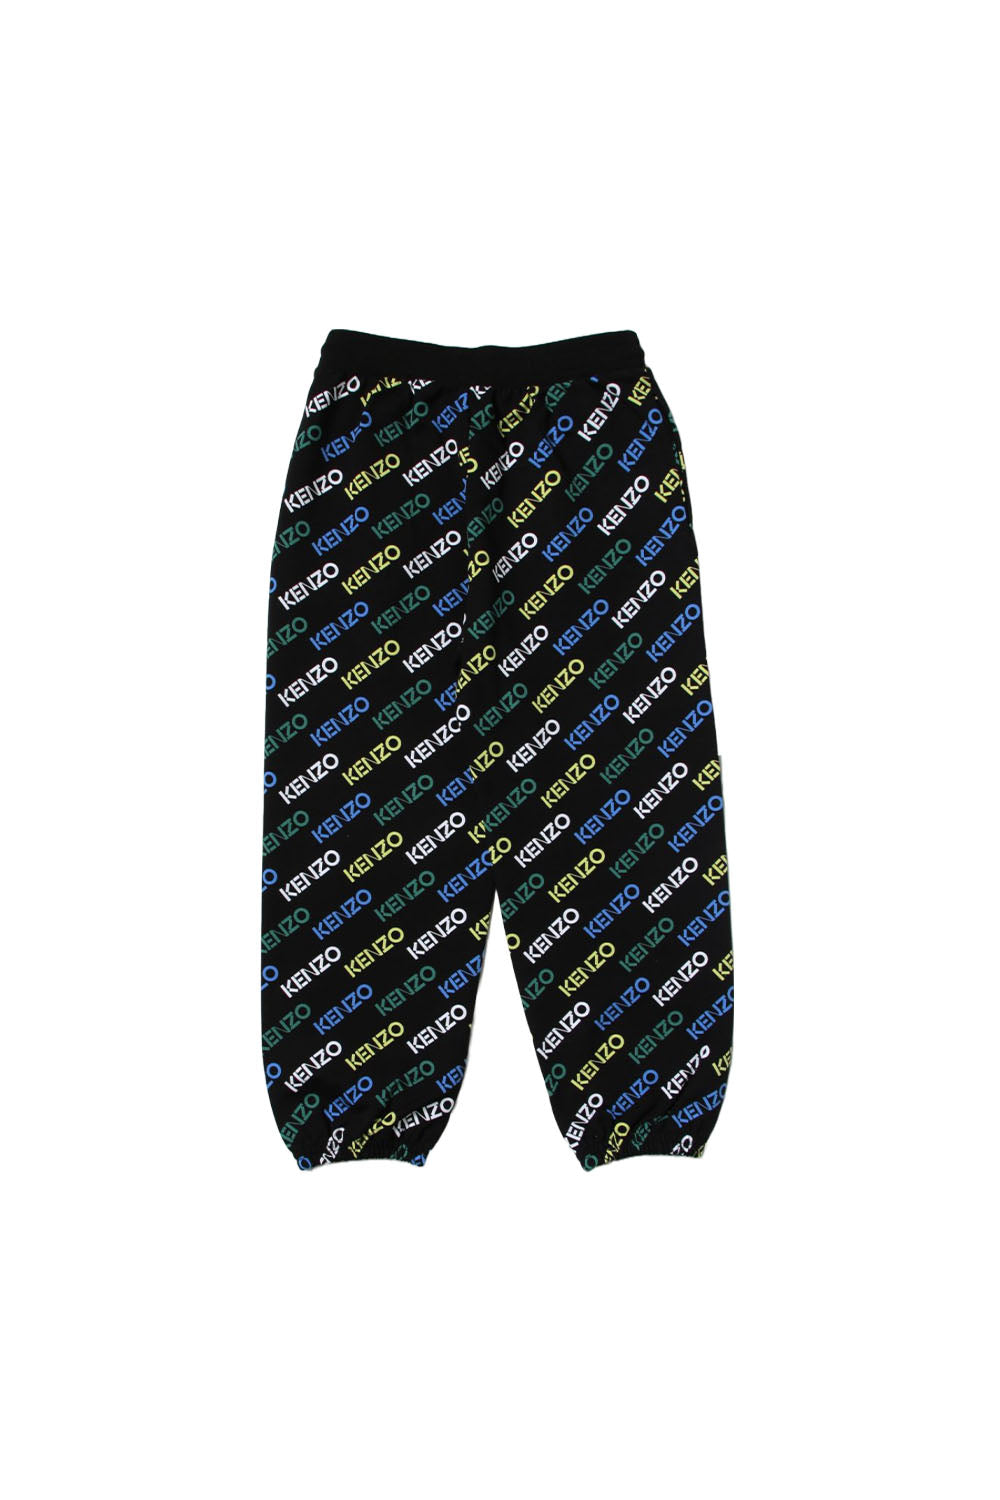 All-Over Print Interlock Joggers for Boys All-Over Print Interlock Joggers for Boys Maison7